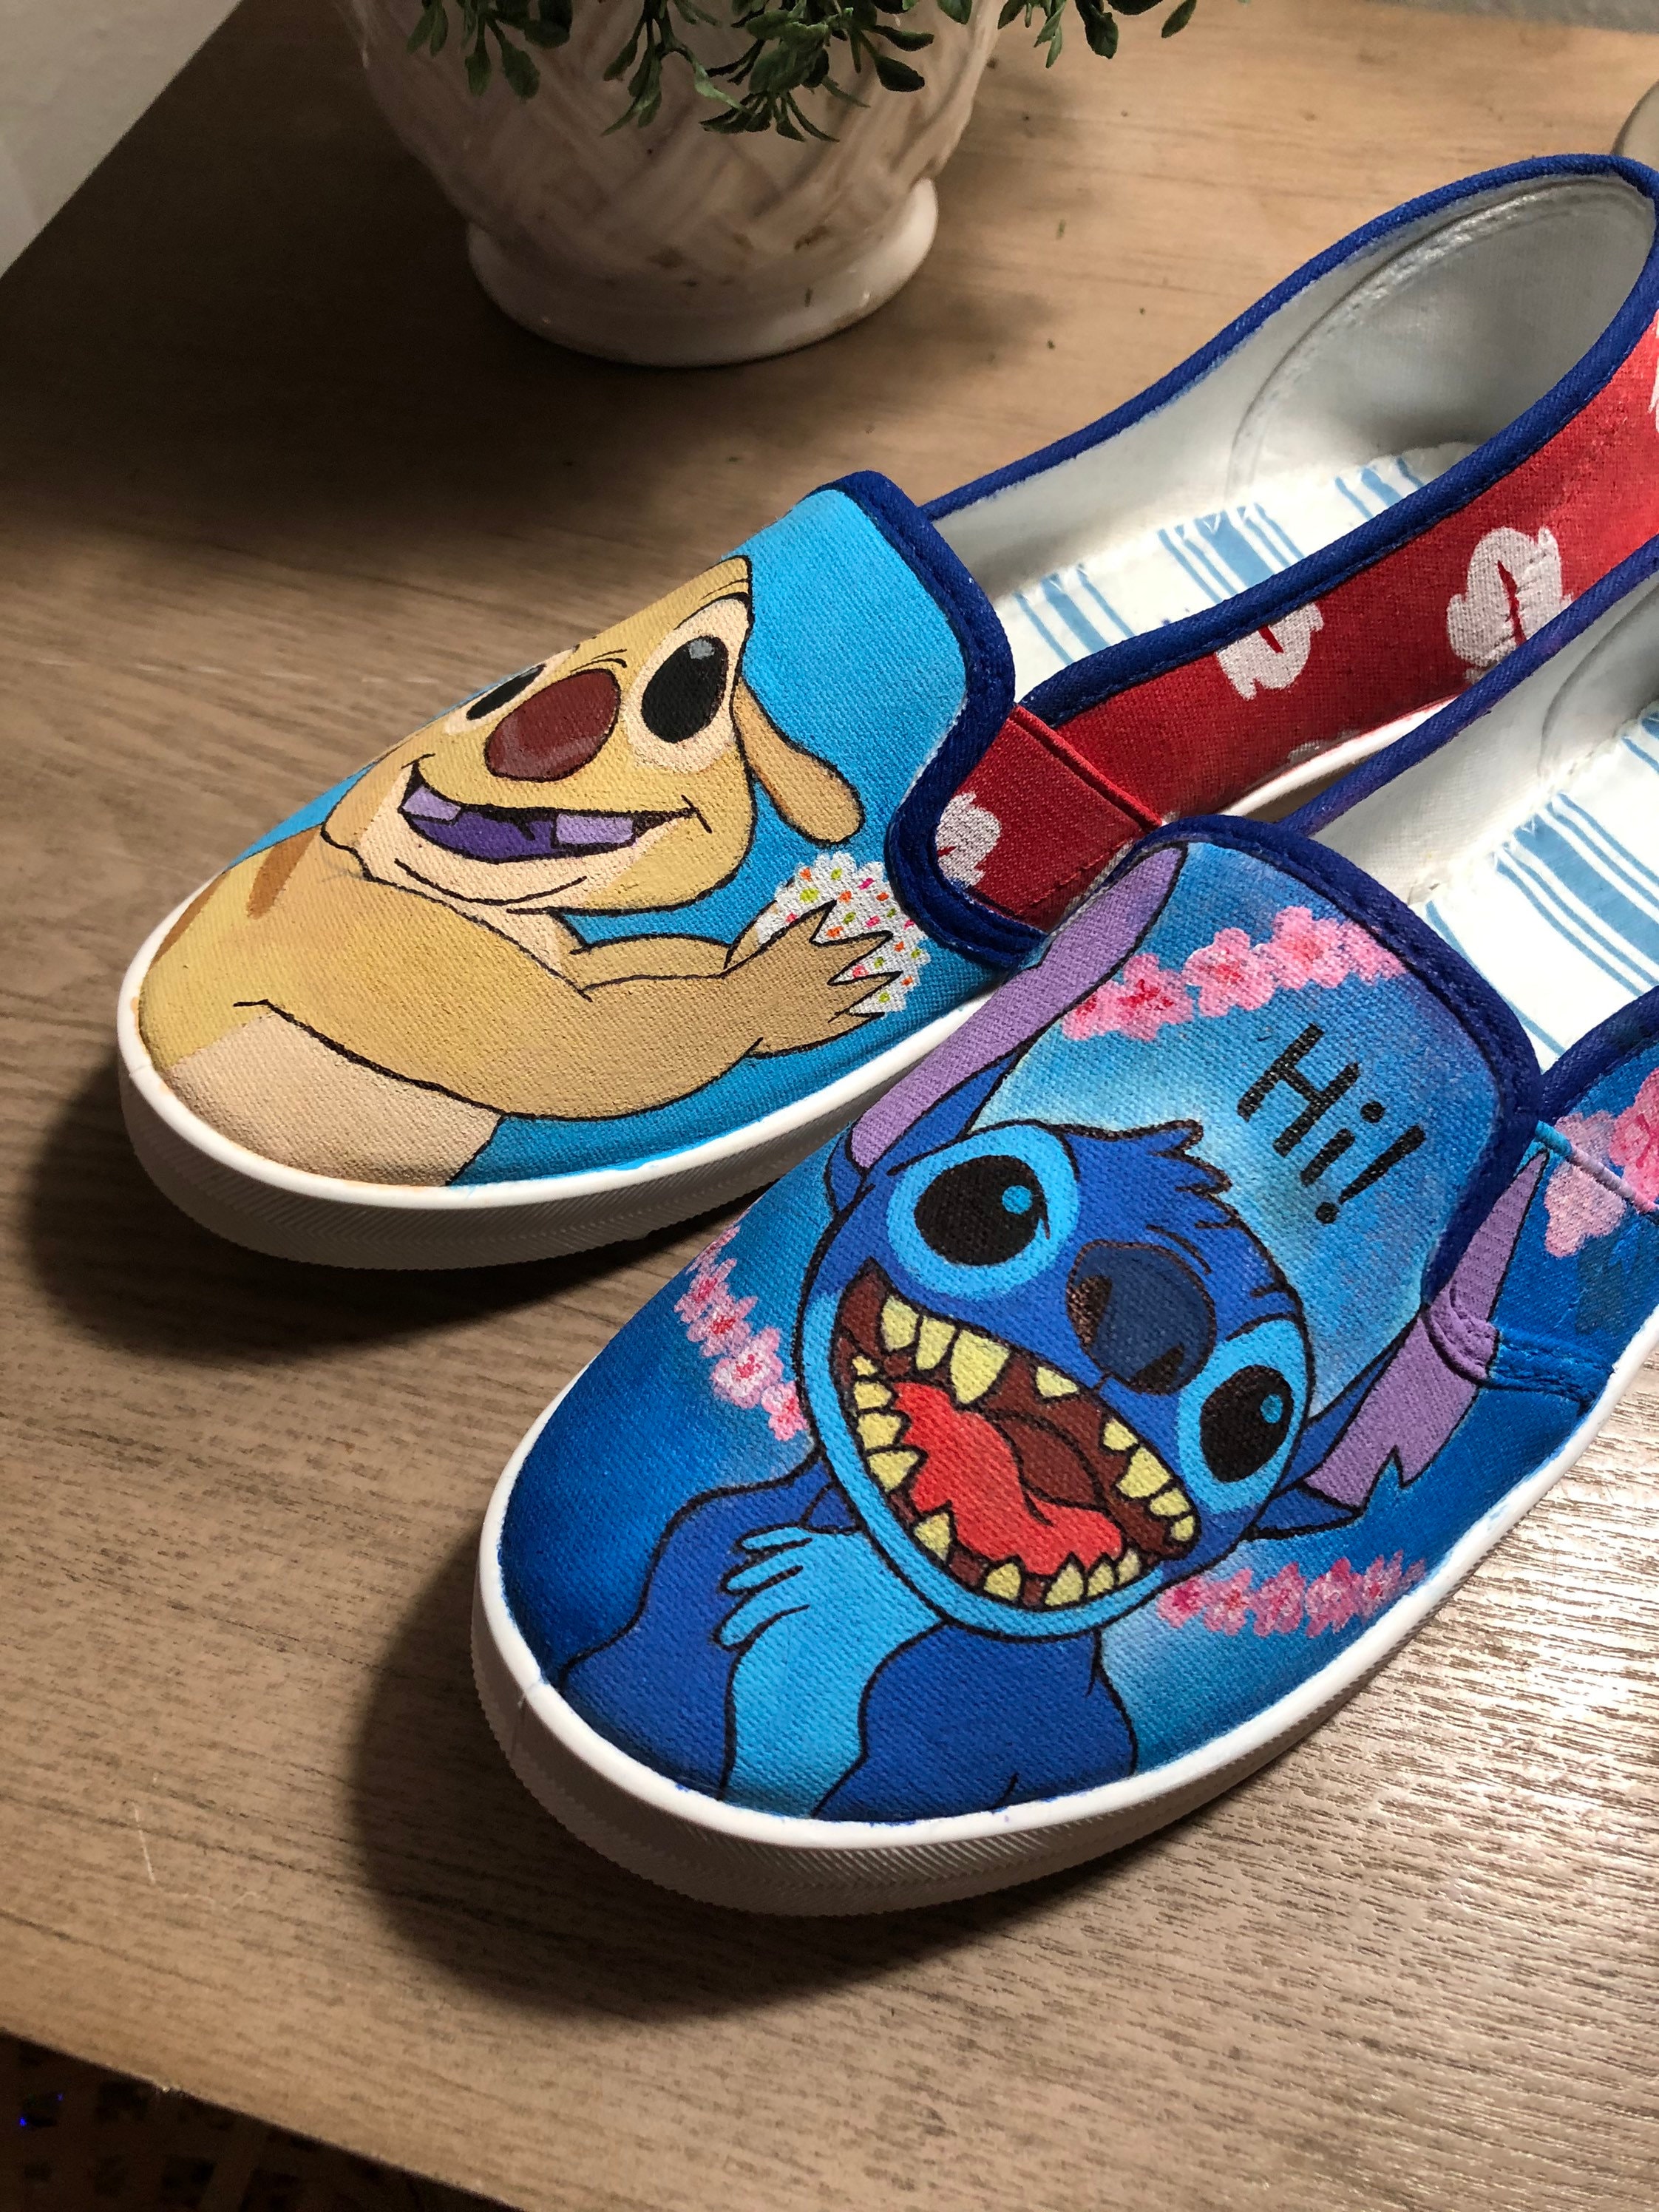 Lilo and Stitch custom shoes | Etsy